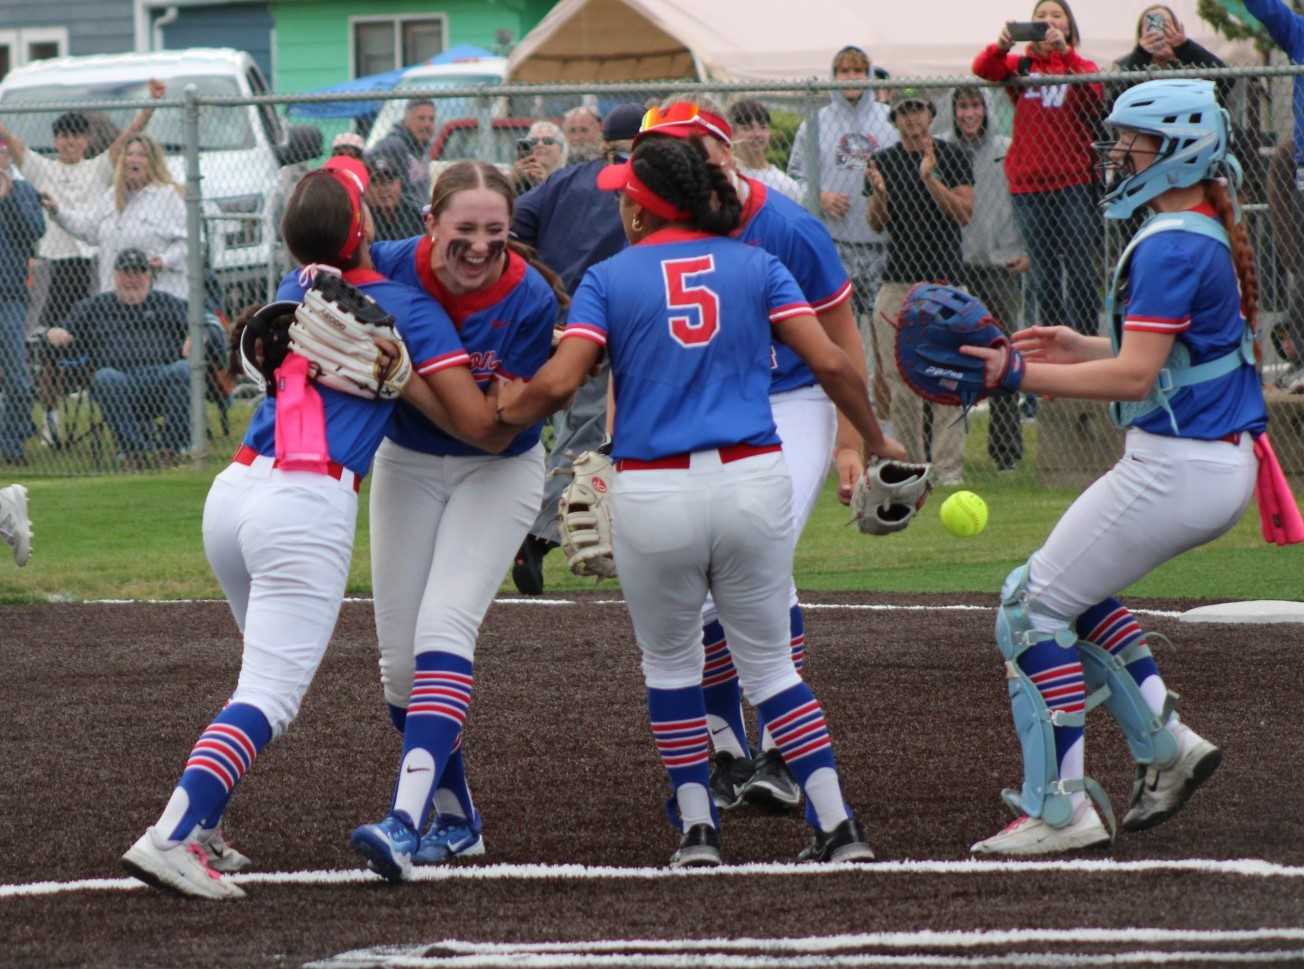 Lebanon players celebrate their 3-1 win over Mid-Willamette rival Dallas in a 5A softball semifinal. (Photo by Jeremy McDonald)